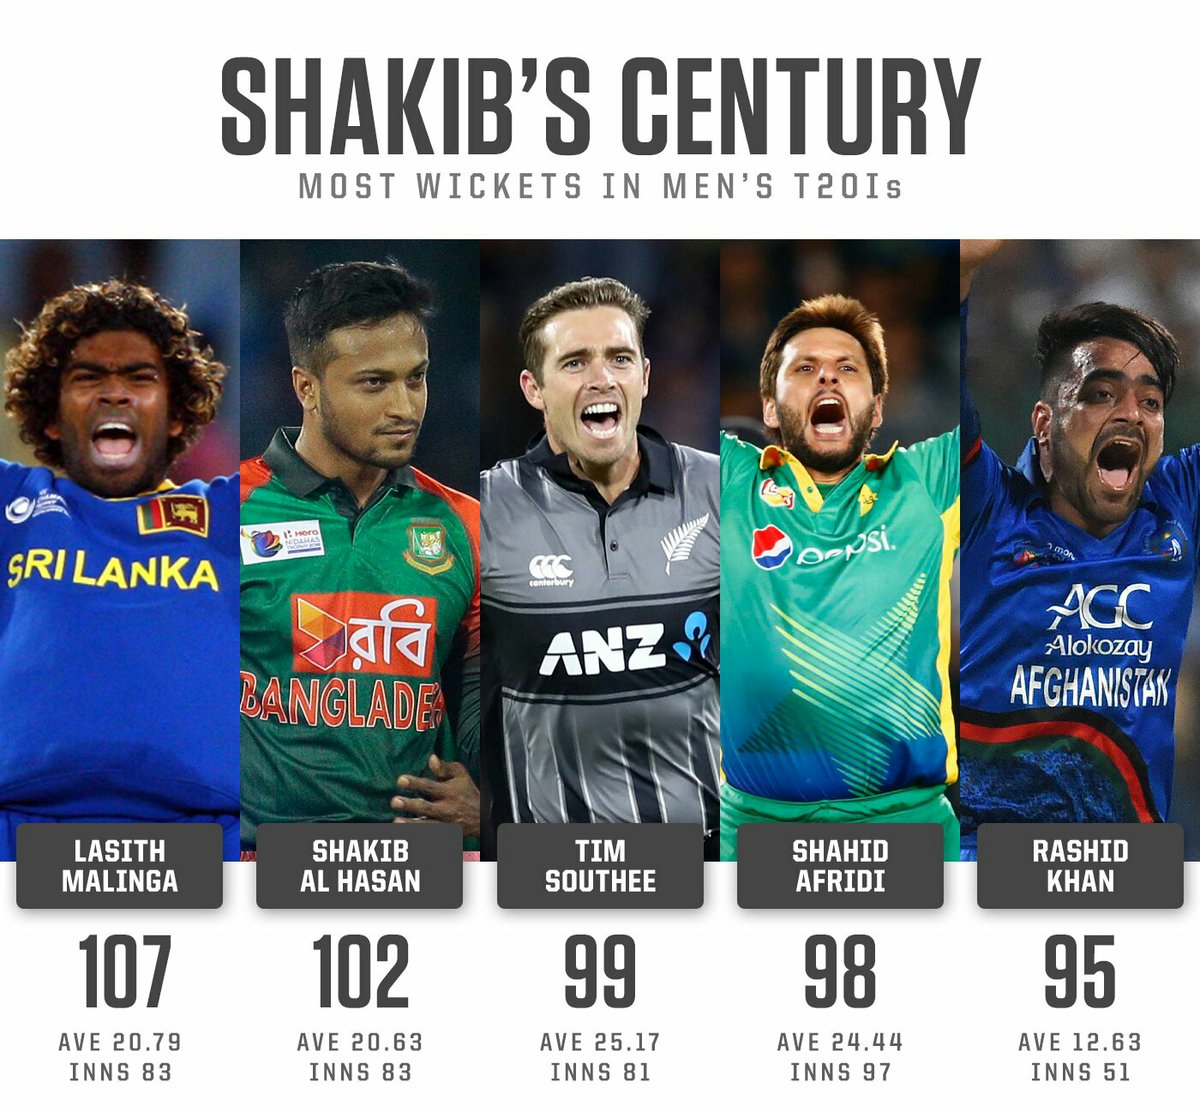 Climbing up the ladder 👏

Shakib Al Hasan 🇧🇩 makes history by becoming only the 2️⃣nd bowler and first-ever spinner to take 1️⃣0️⃣0️⃣ wickets in T20Is 💪

📸: ESPNcricinfo

#ShakibAlHasan #BANvAUS #BANvsAUS #Bangladesh #SriLanka #NewZealand #Pakistan #Afghanistan #T20 #Cricket